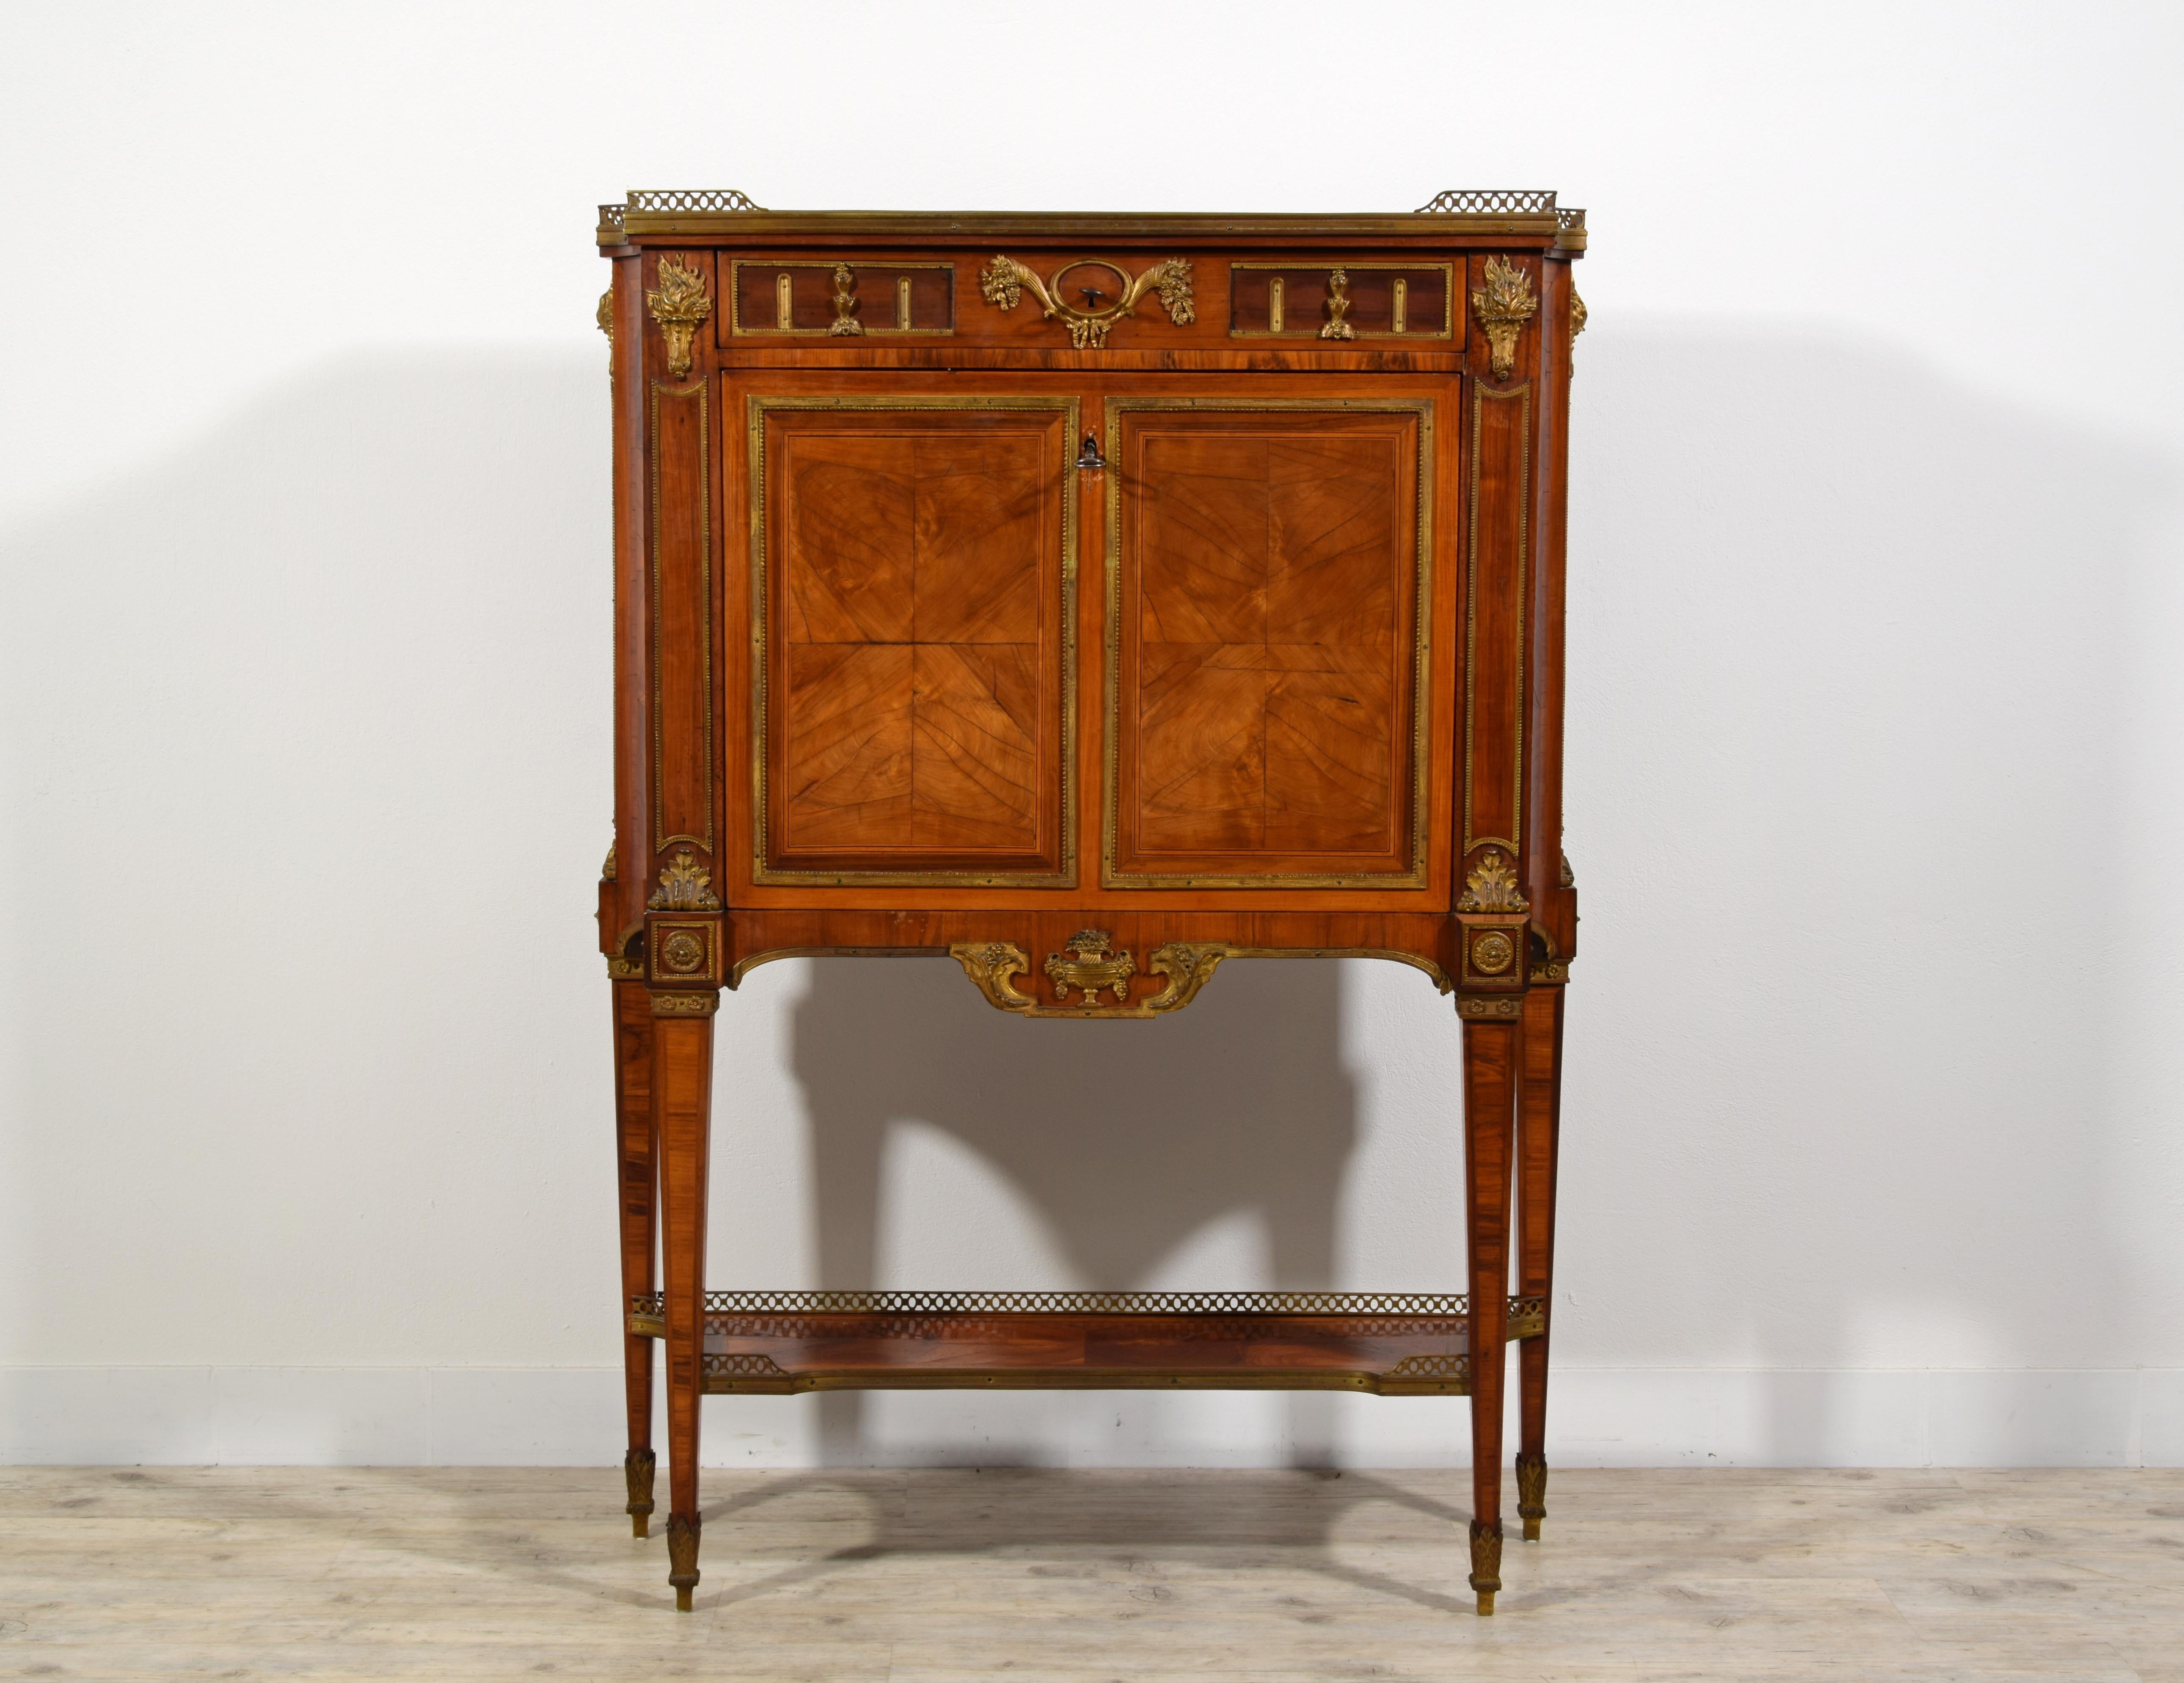 19th Century, French Louis XVI Style Wood Secretaire Sideboard 

Rare veneered wood secretaire sideboard, France, late 18th century - early 19th century
Measurements: cm W 105 x H 113 x D 35; height of the desk top with open drop 75 cm

The Louis